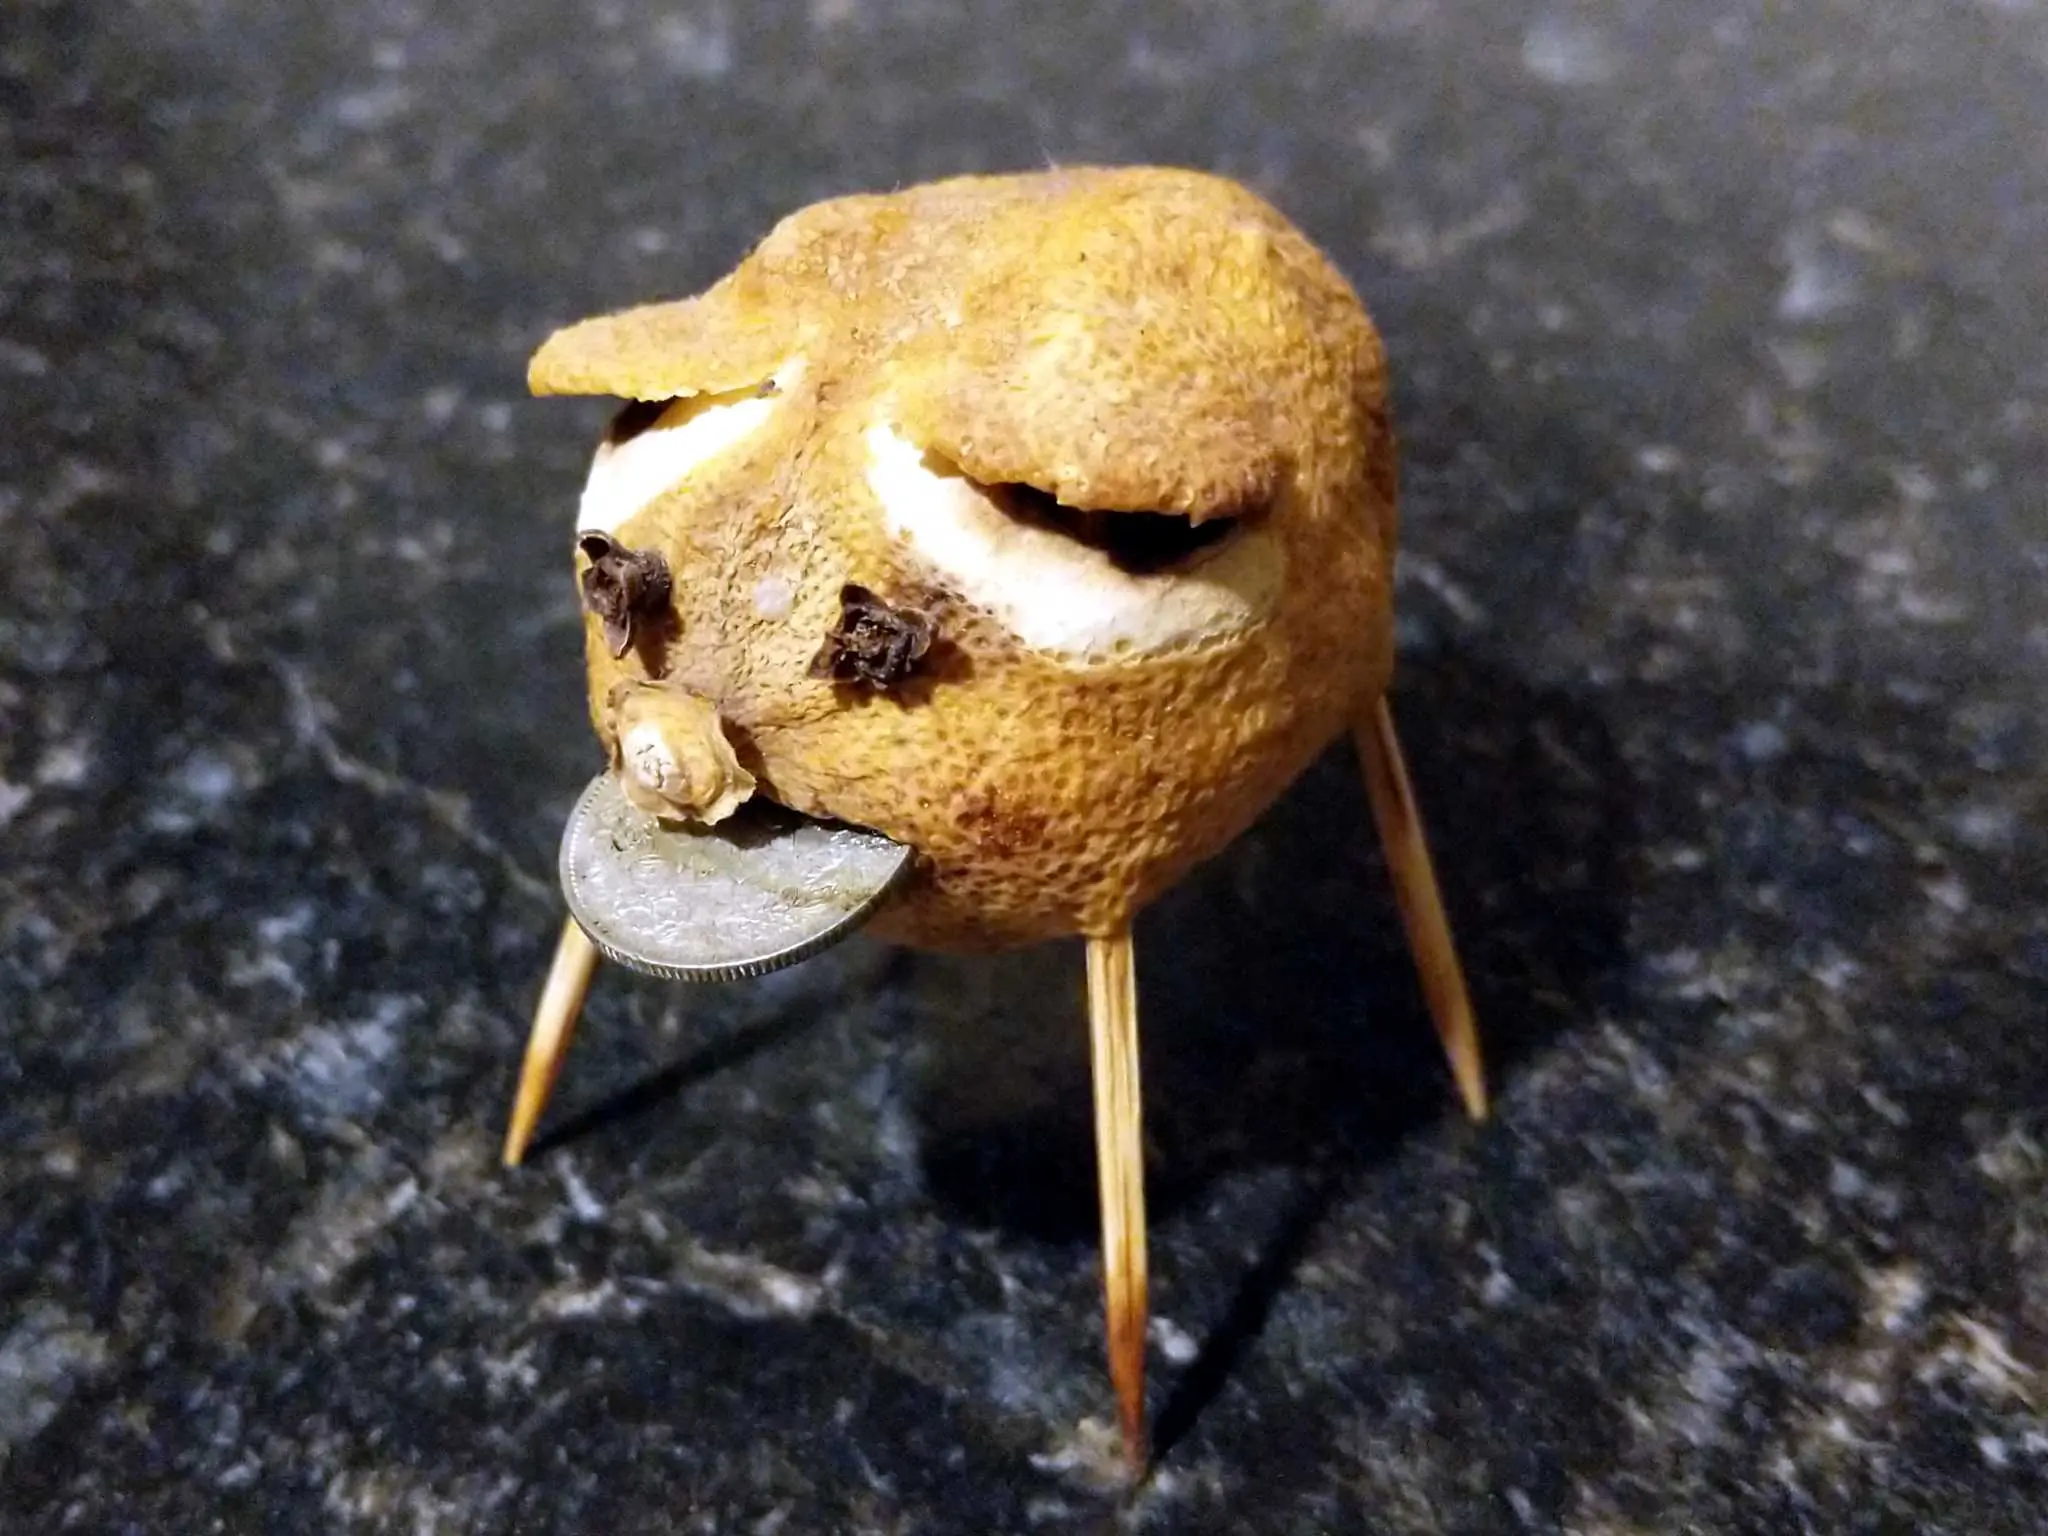 A dried out but intact lemon pig